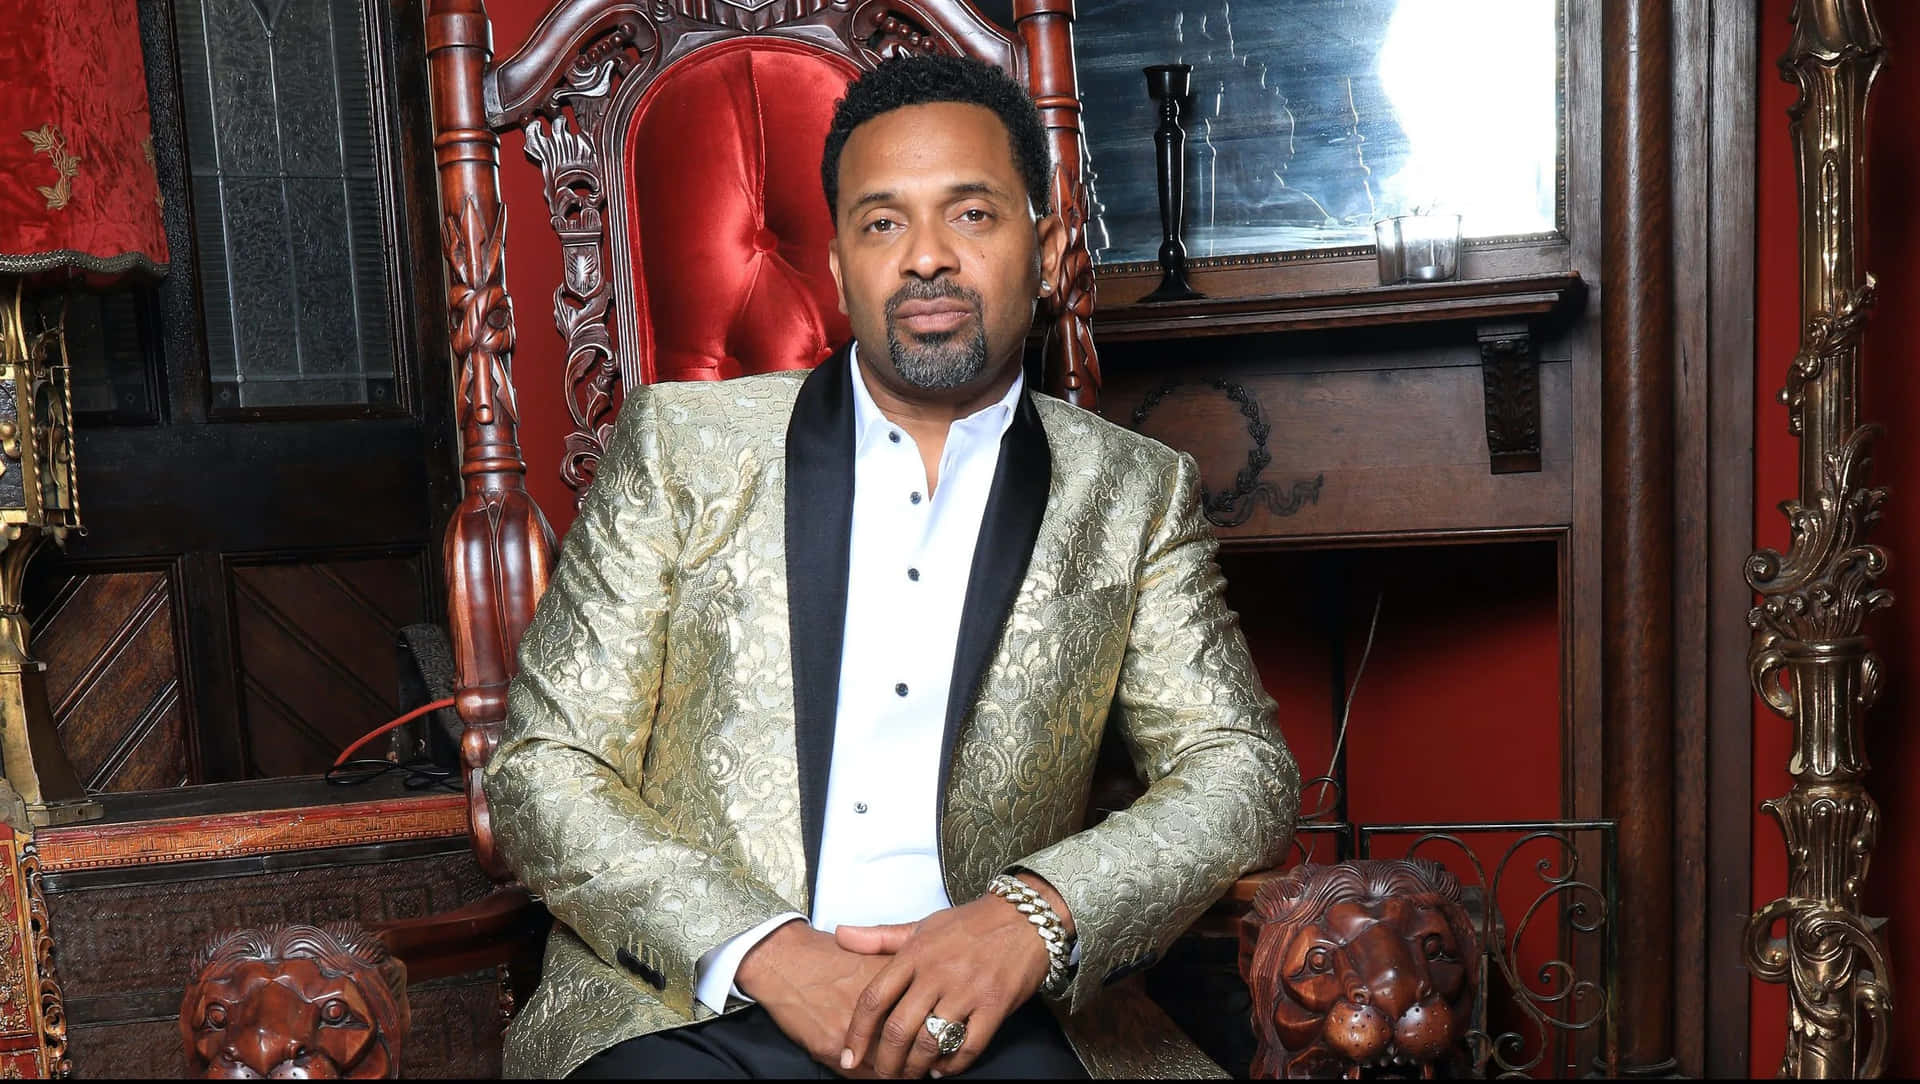 Comedian Mike Epps posing with sophistication. Wallpaper